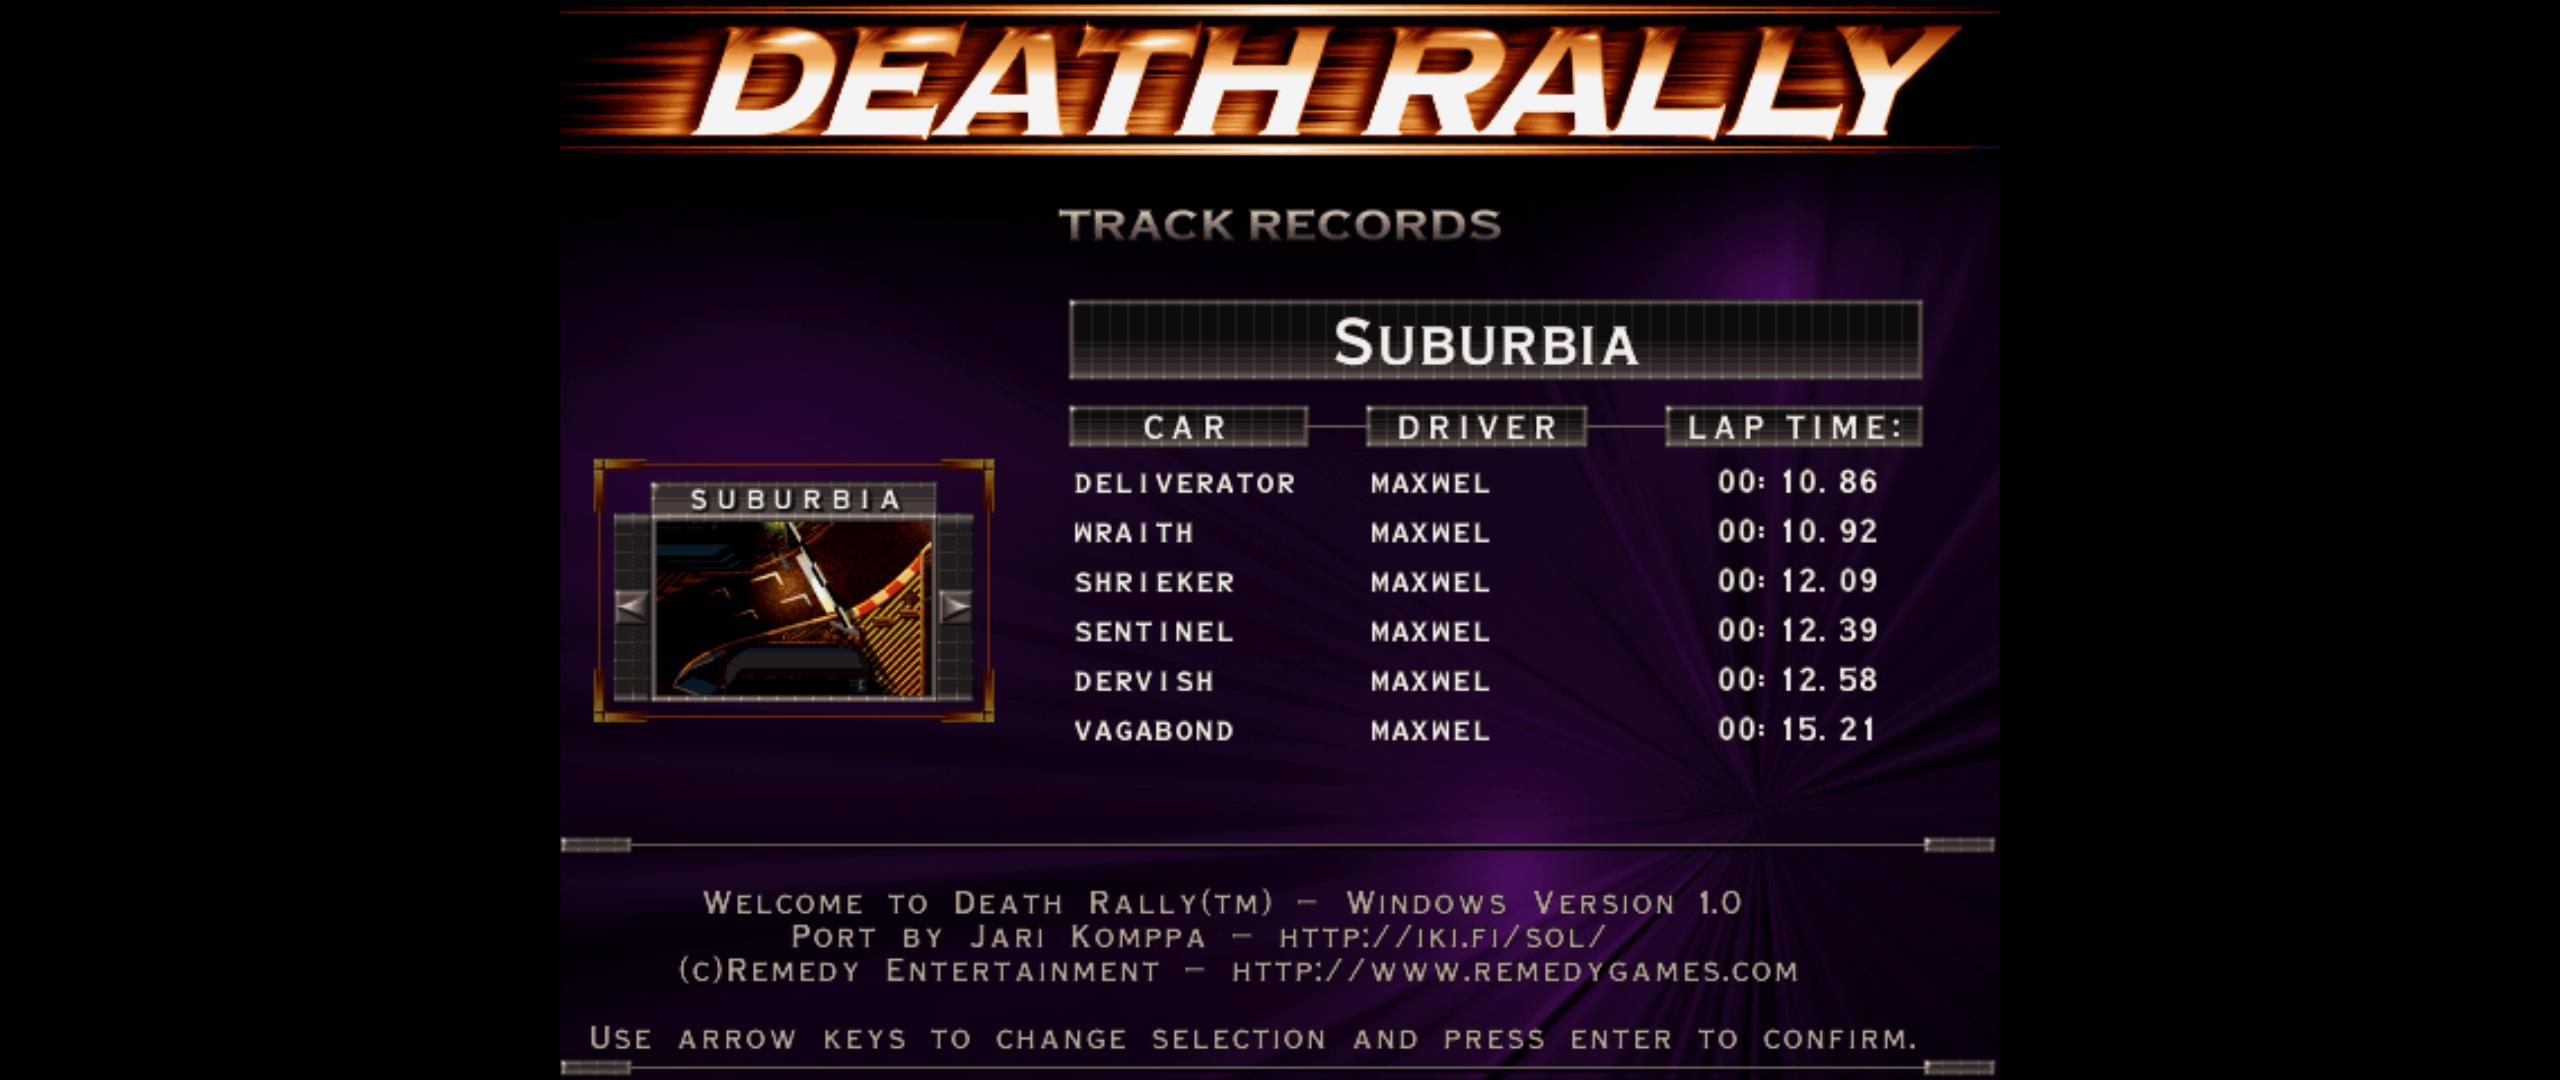 Maxwel: Death Rally [Suburbia, Deliverator Car] (PC) 0:00:10.86 points on 2016-03-02 03:27:38